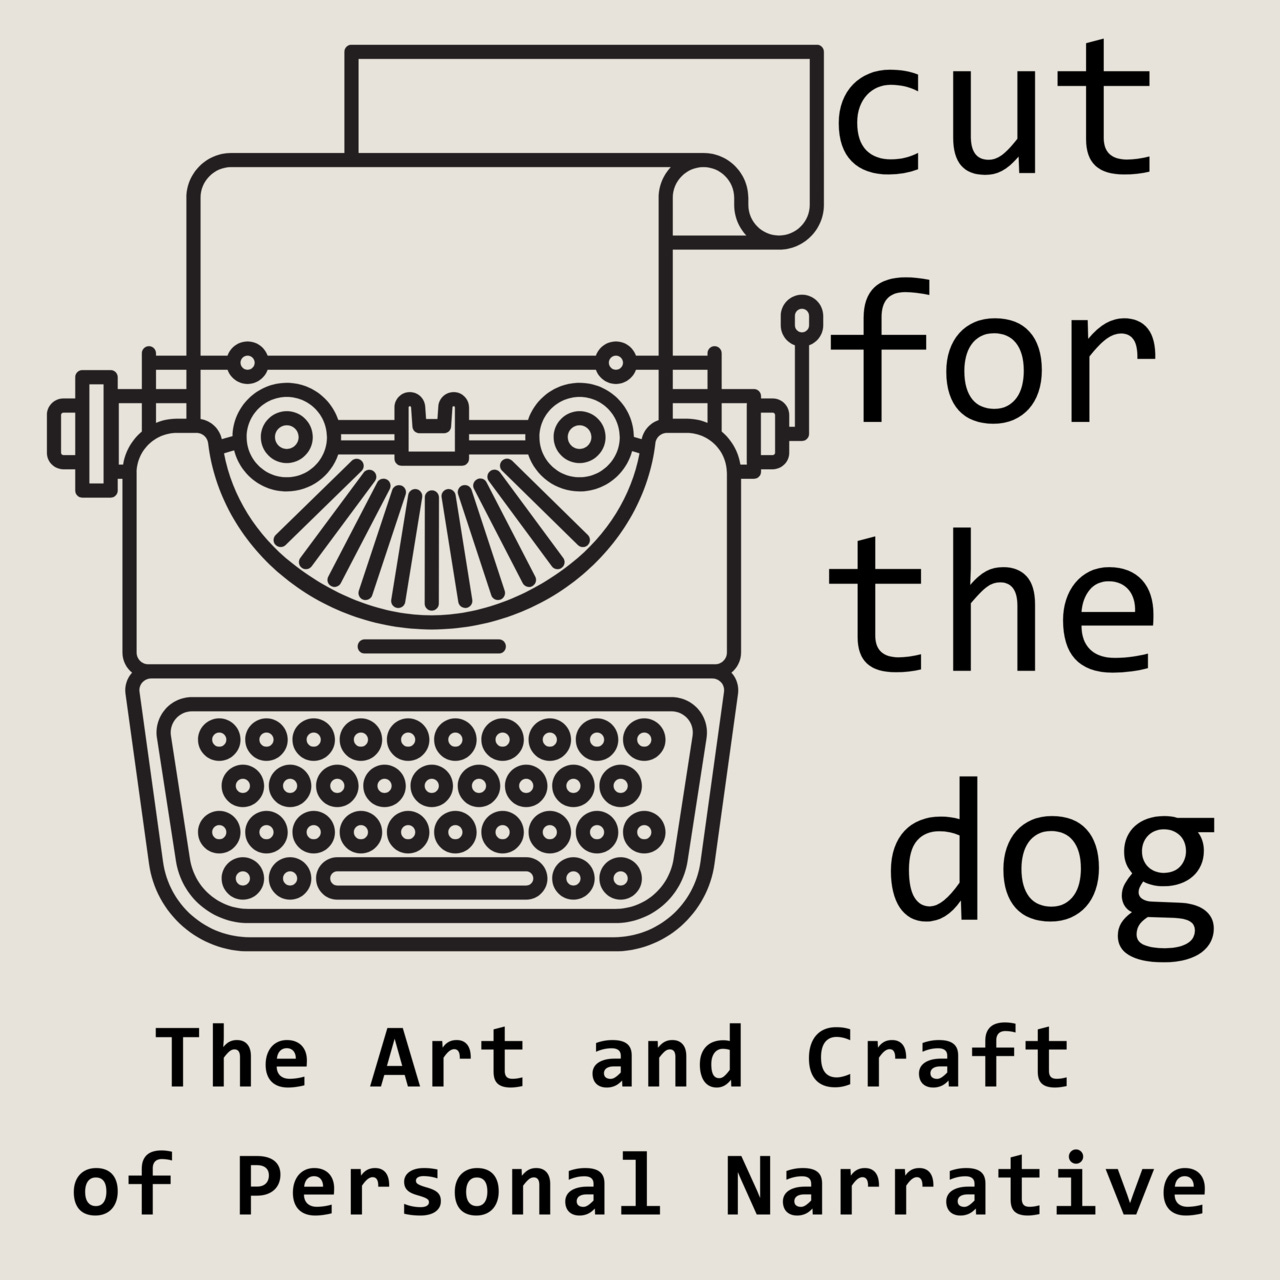 Cut for the Dog: The Art and Craft of Personal Narrative